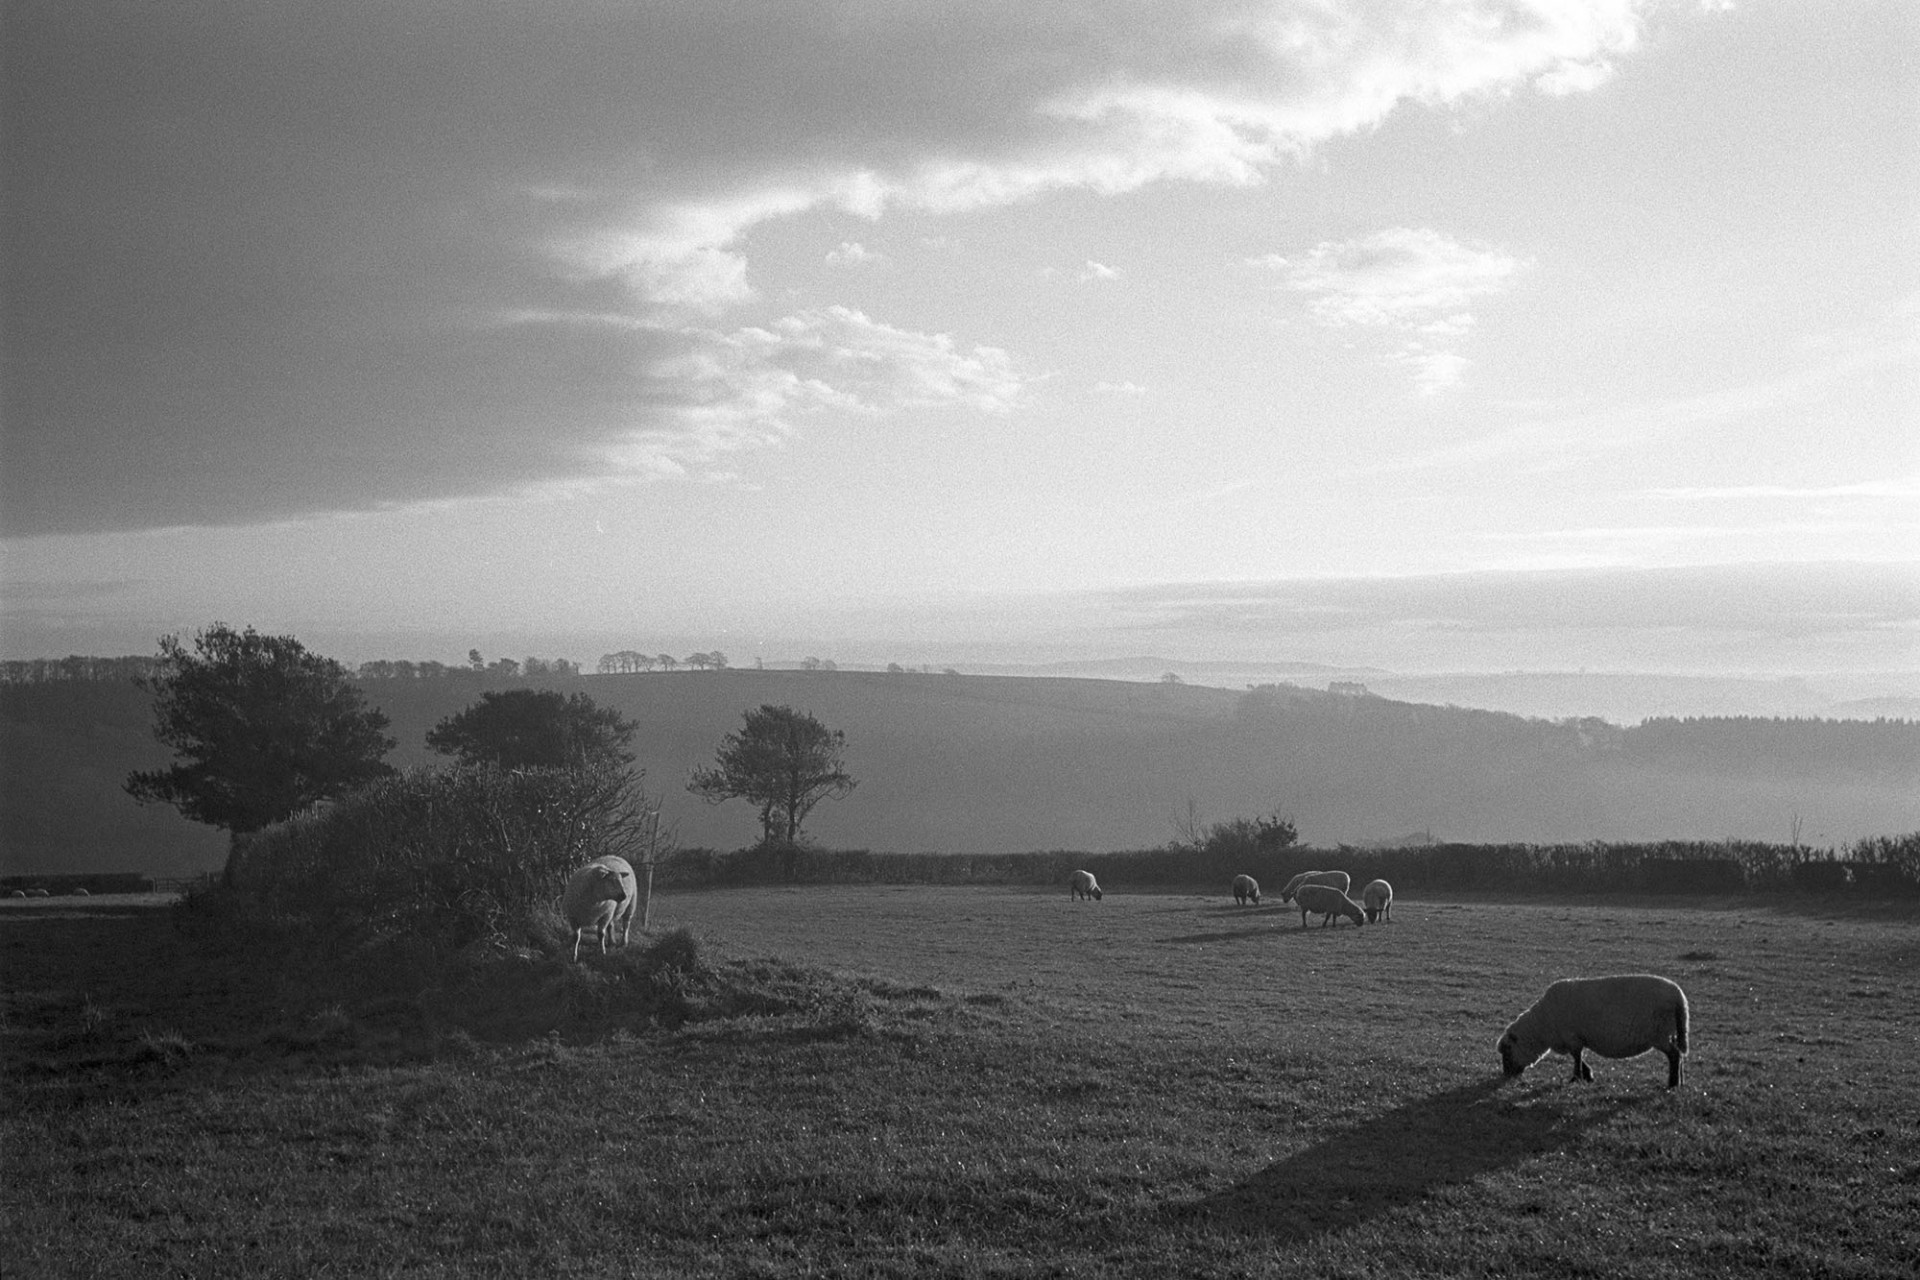 Morning landscape with sheep and cloud obscuring sun. 
[Sheep grazing in a field at Lakehead, Chulmleigh, in the morning. Clouds are in the sky above them, obscuring the sun. The background of fields and trees is hazy.]